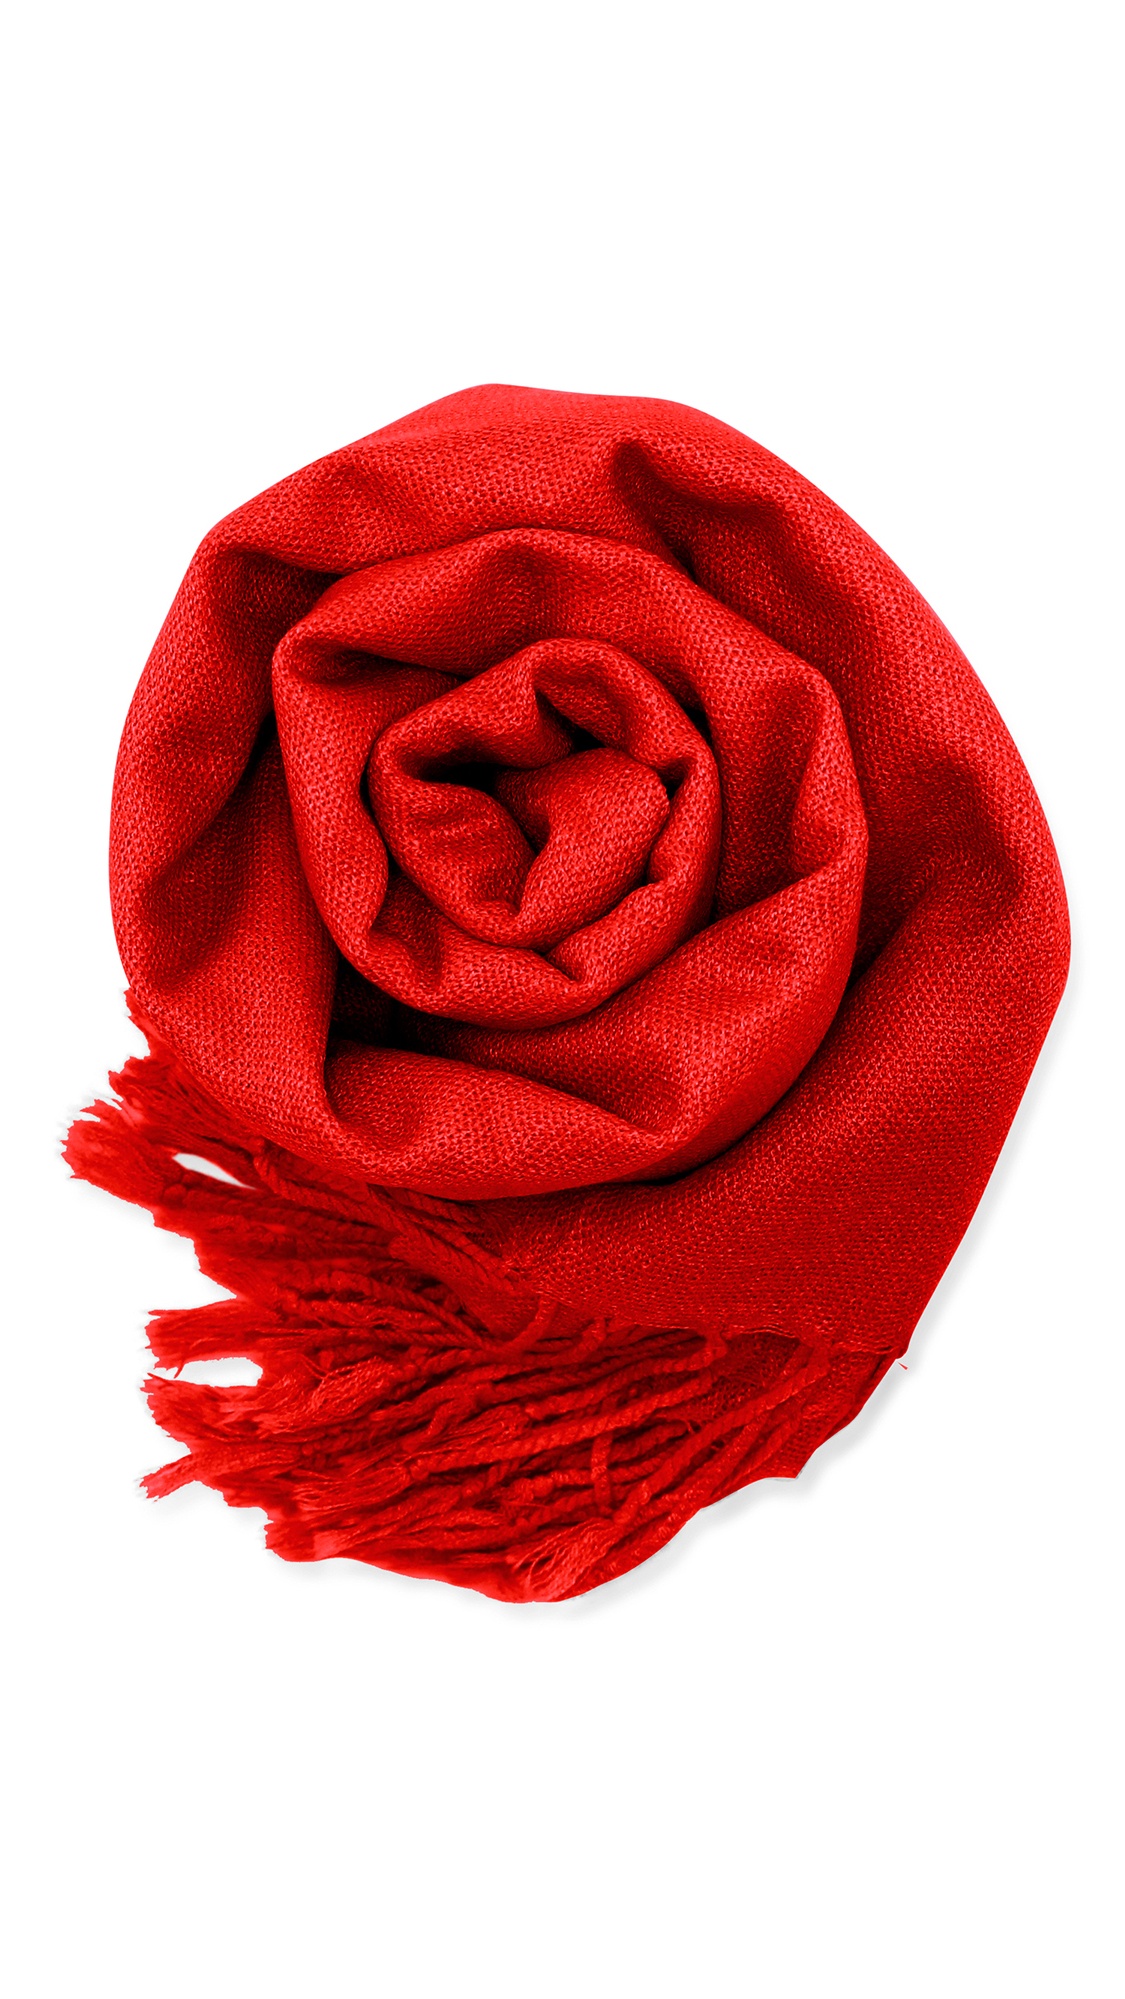 Fashion Women's Scarf Lightweight Long Scarfs Luxury Lady Classic Range Pashmina Silk Solid colors Wraps Shawl Stole Soft Warm Scarves For Women - image 5 of 5